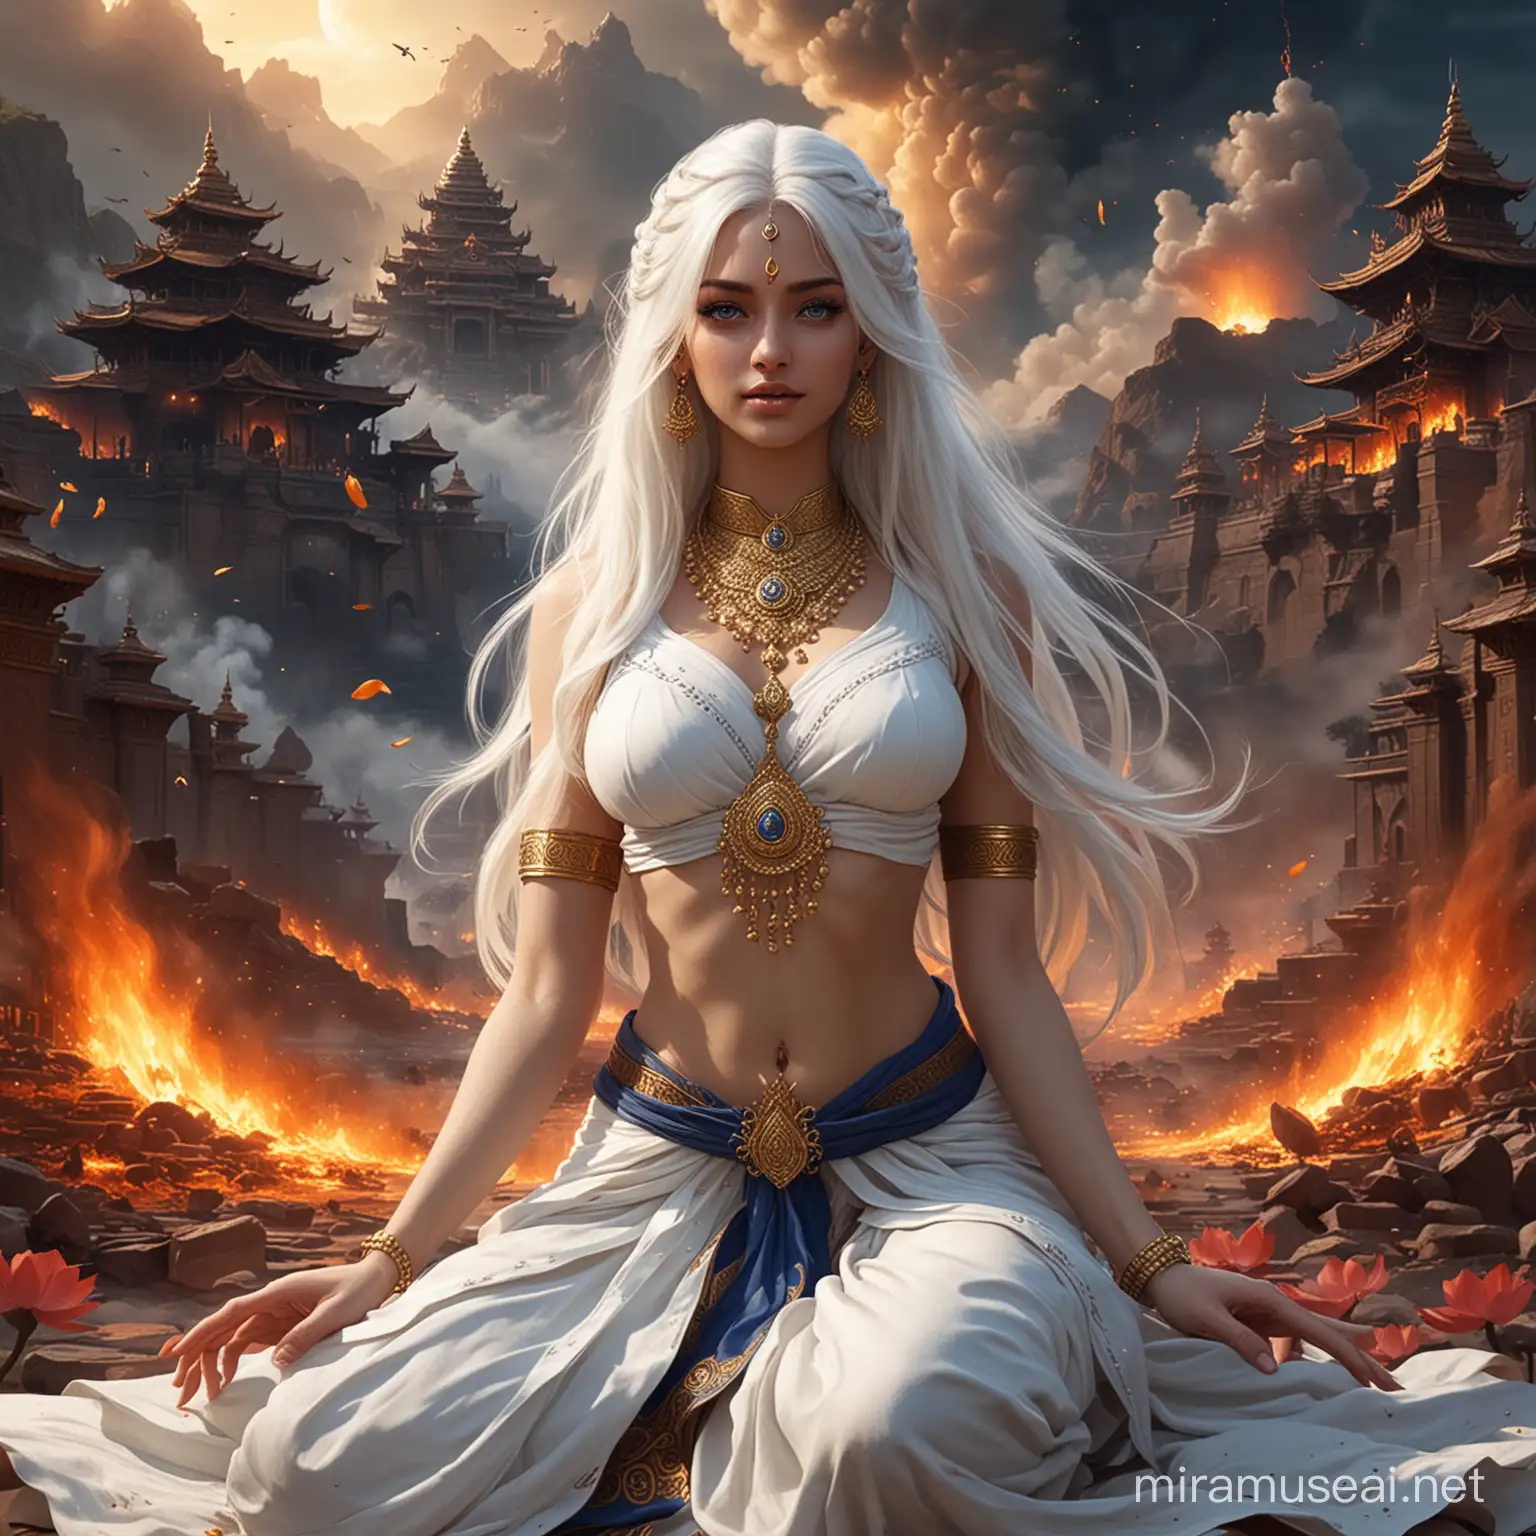 Mystical WhiteHaired Empress in Combat Amidst Flames and Demonic Goddesses